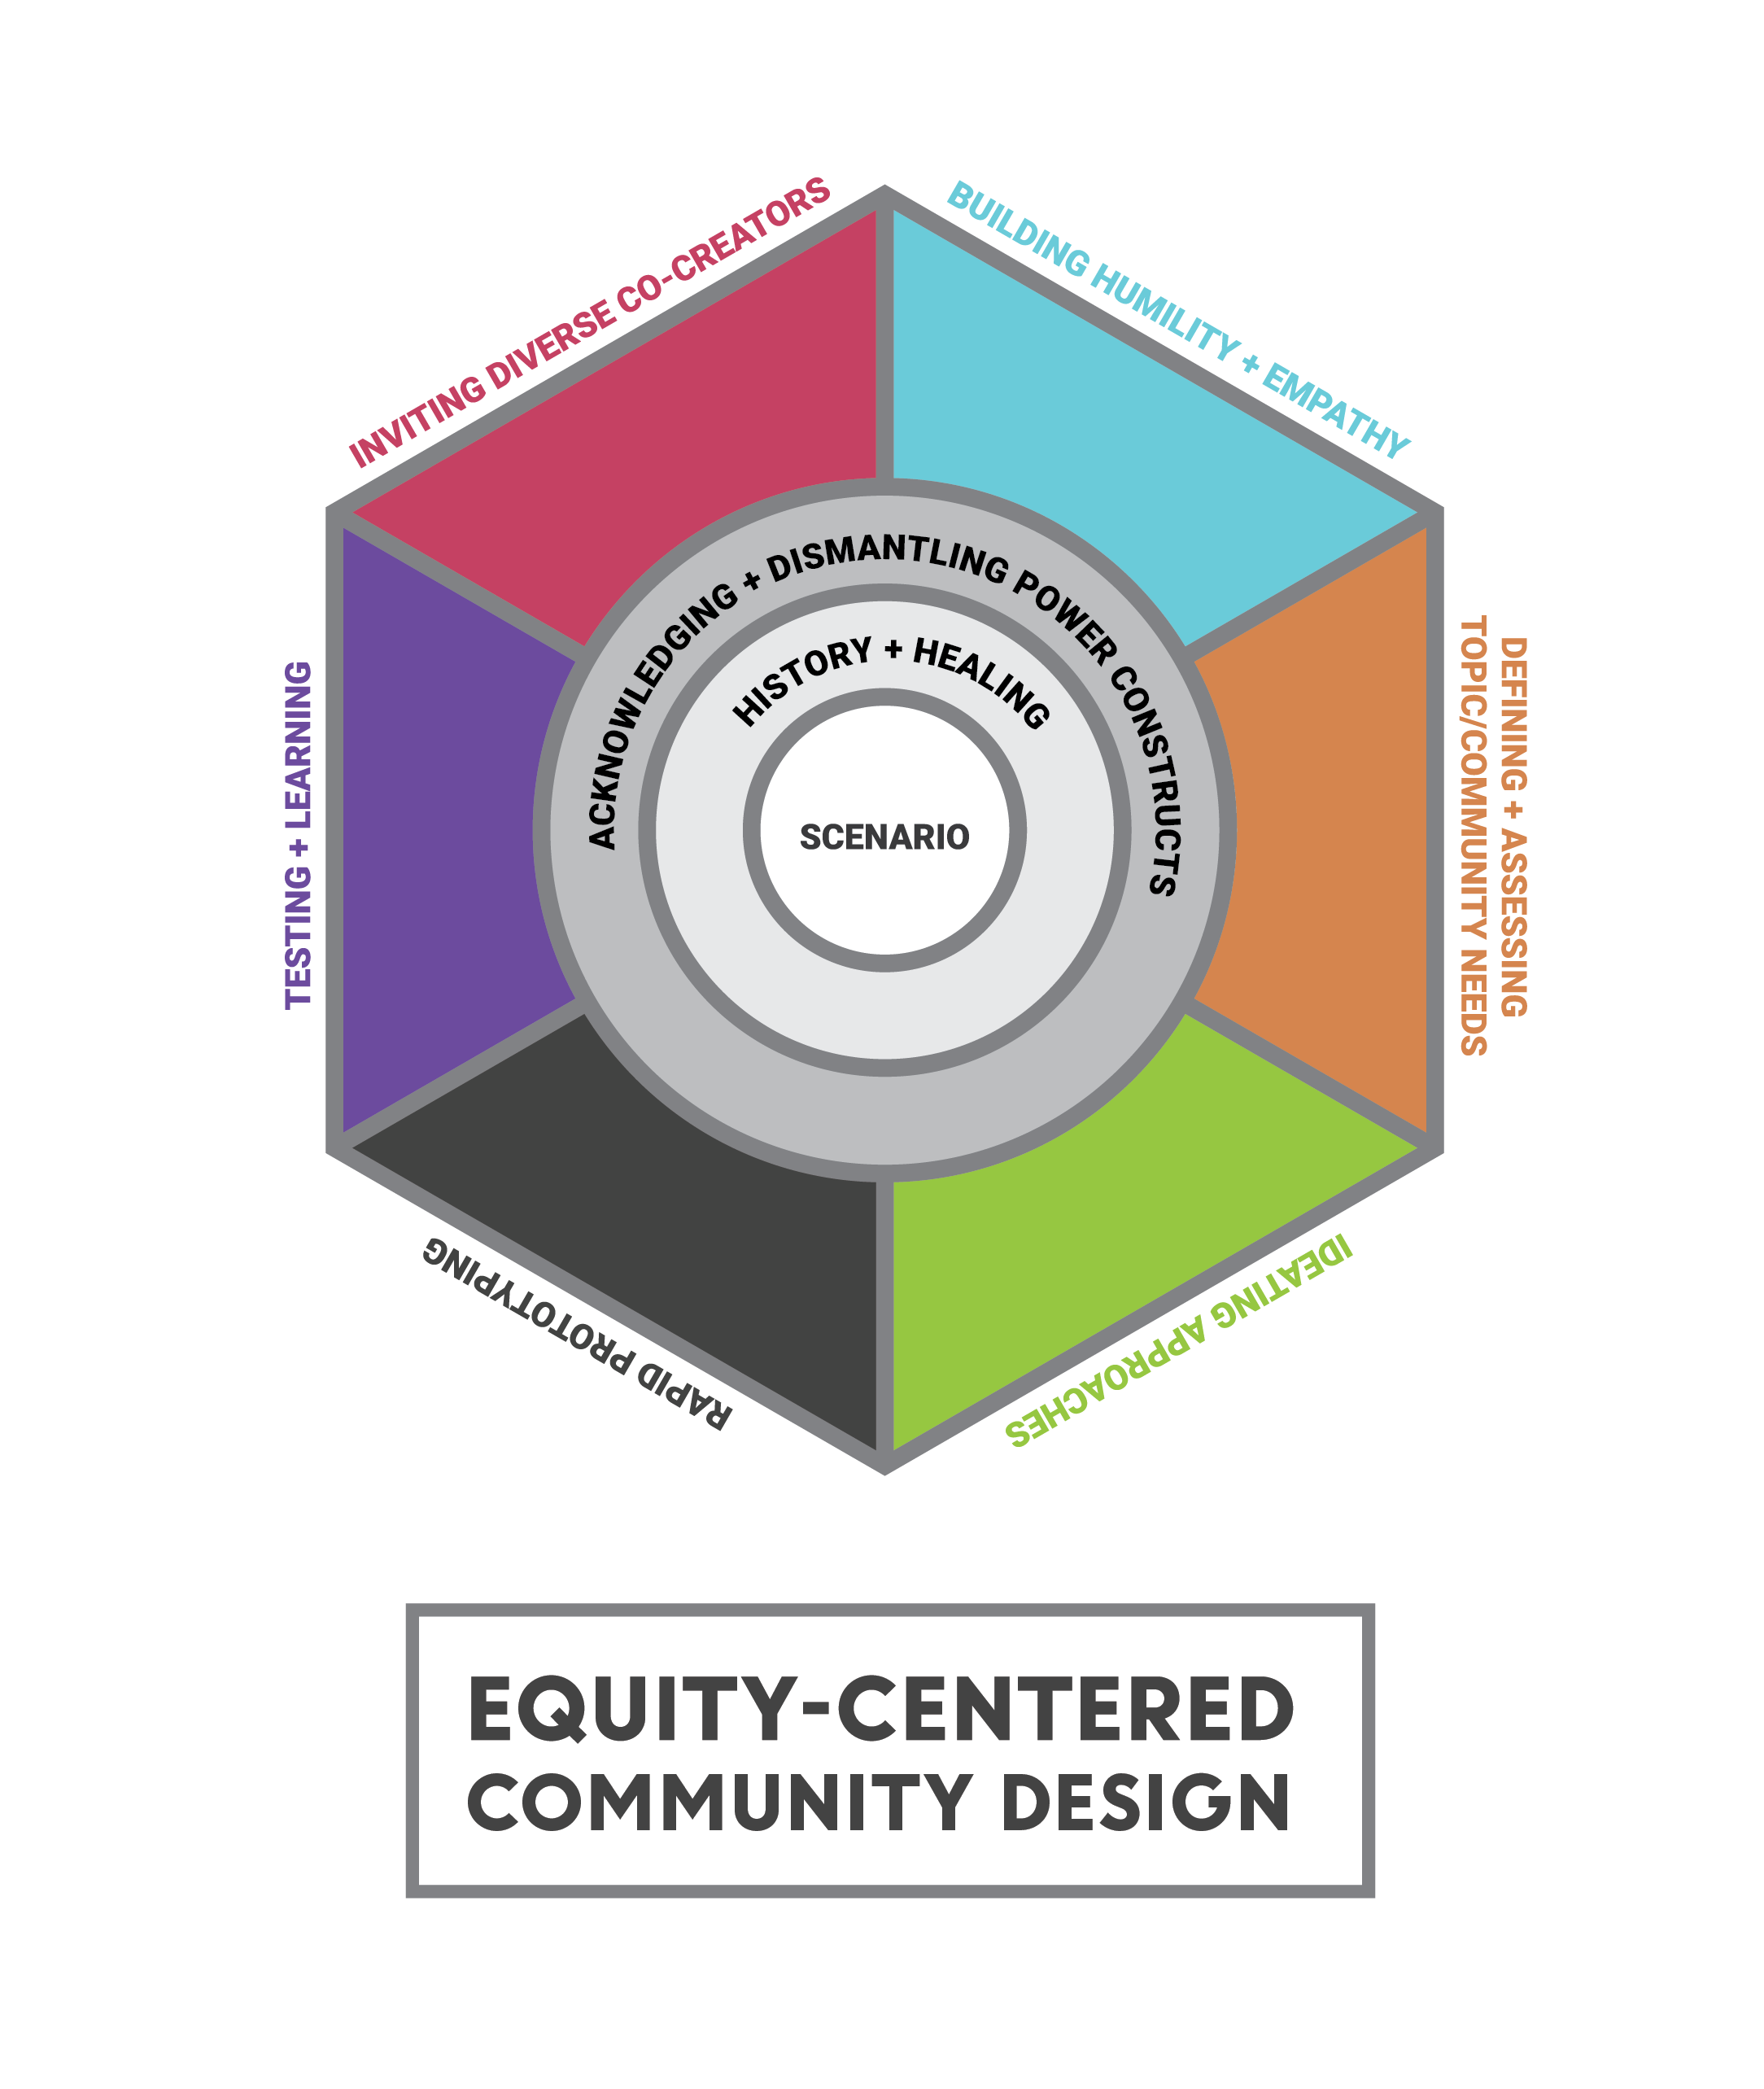 Image 1 - This is a hexagonal image that represents the iterative process of Equity-Centered Community Design. It features six color-coded pieces of the hexagon that show the various processes of the framework: Inviting Diverse Co-Creators, Building Humility and Empathy, Defining/Assessing Topic/Community Needs, Ideating Approaches, Rapid Prototyping, and Testing and Learning. In the center of the hexagon is a circle that represents the scenario or context. Encircling that circle is ring that reads: History & Healing. Encircling that ring is a ring that reads: Acknowledging and Dismantling Power Constructs.